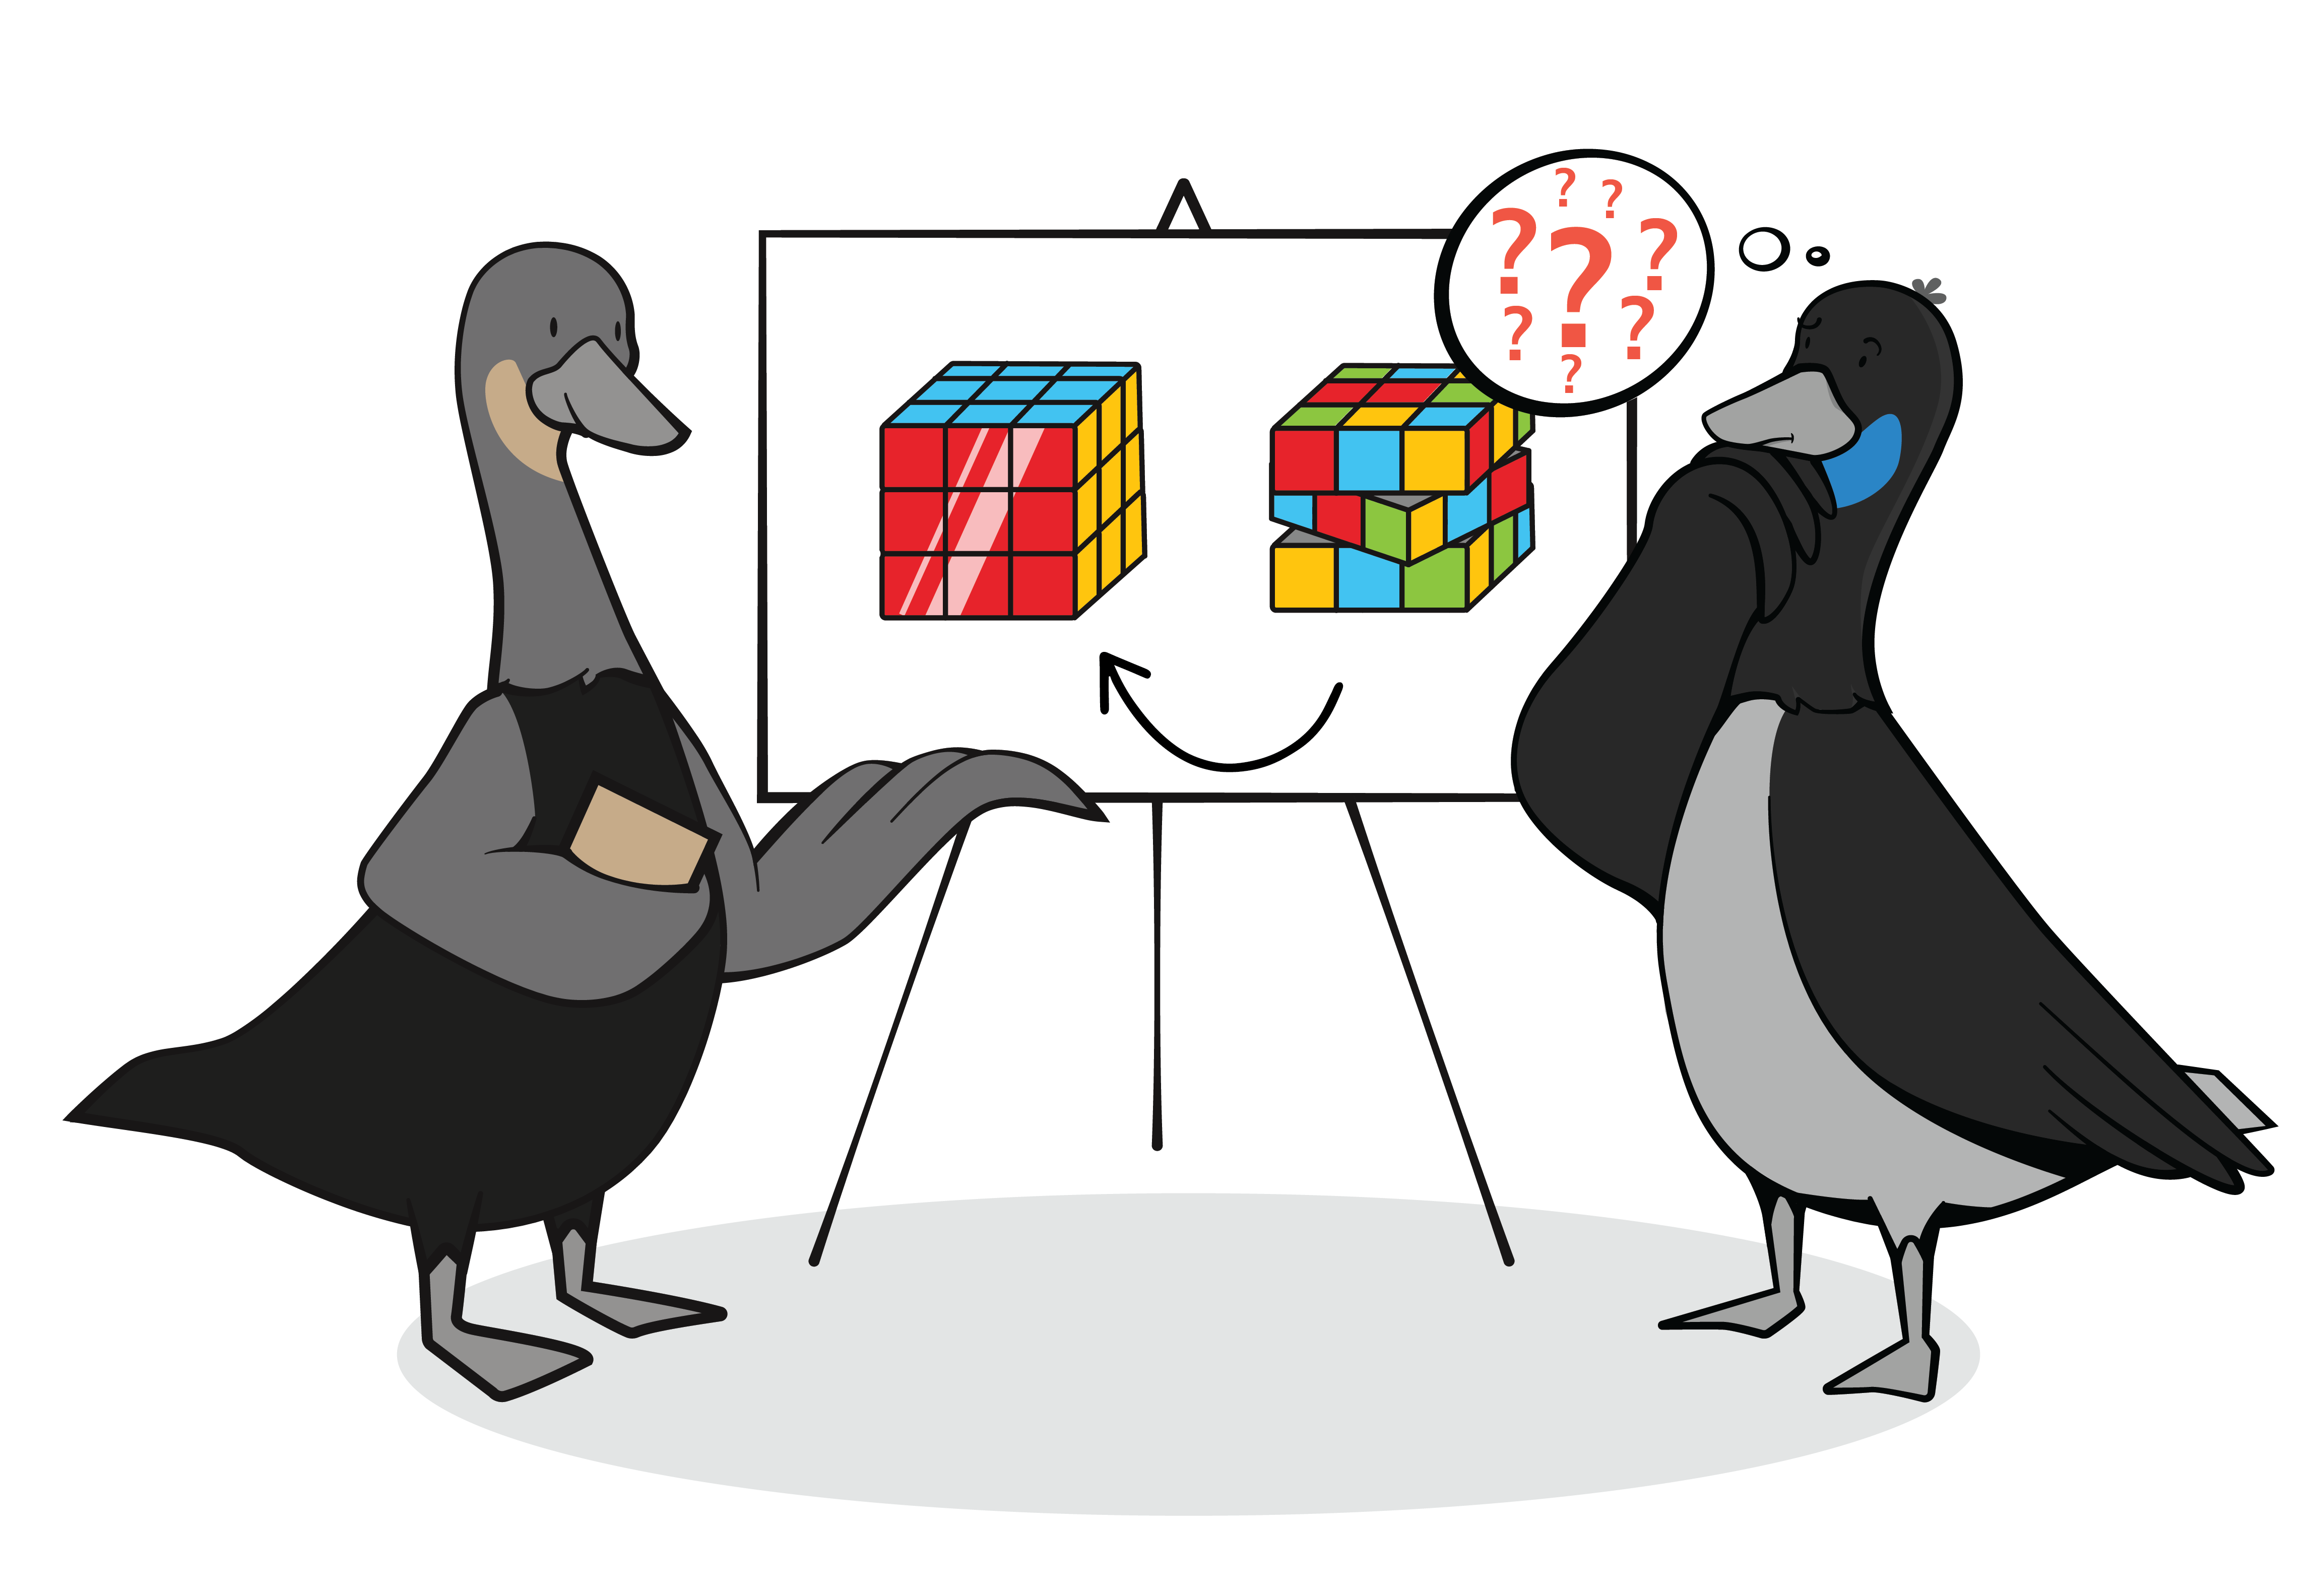 Goose explaining to another goose how to solve a Rubik's Cube with a poster under header Frequently Asked Questions